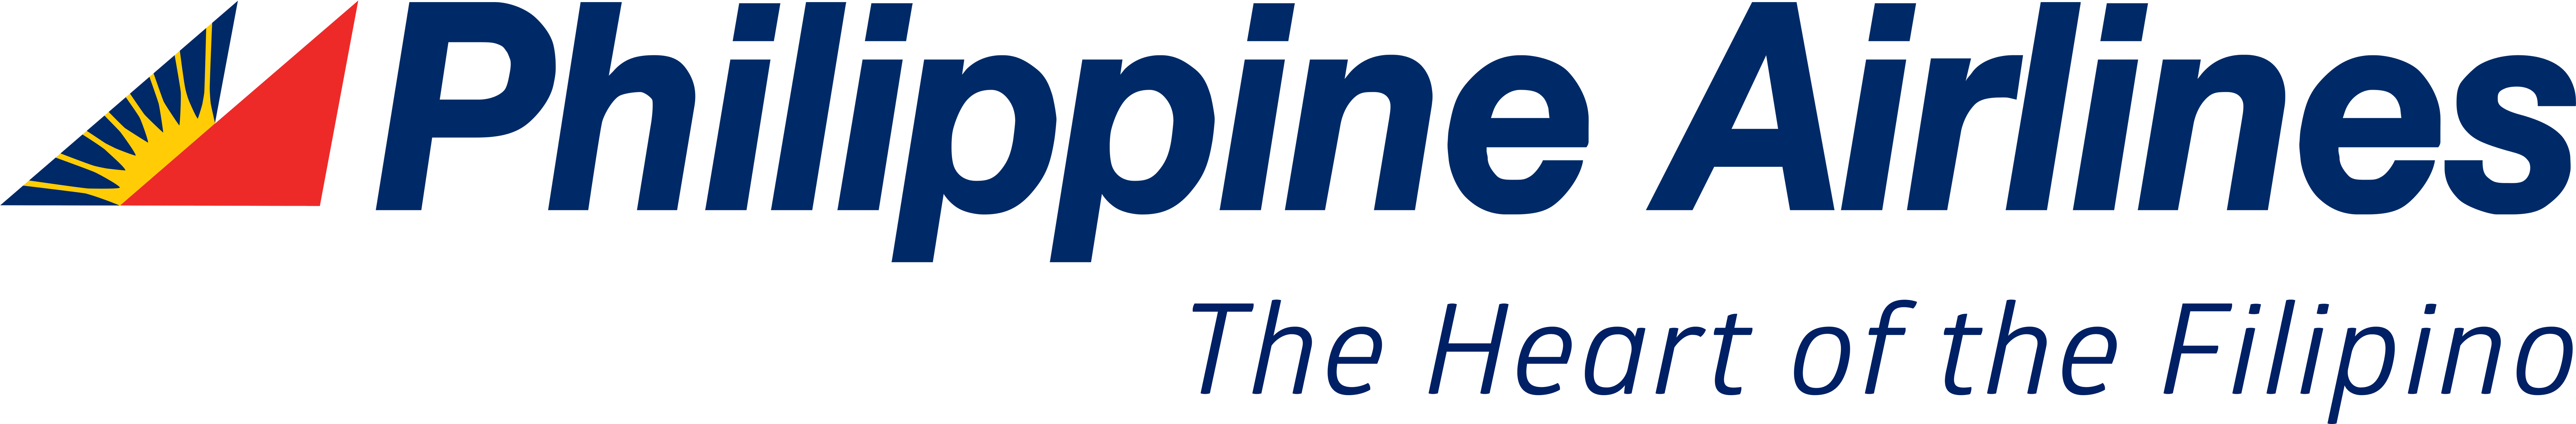 Next - Philippine Airlines Logo Png (12050x3645), Png Download